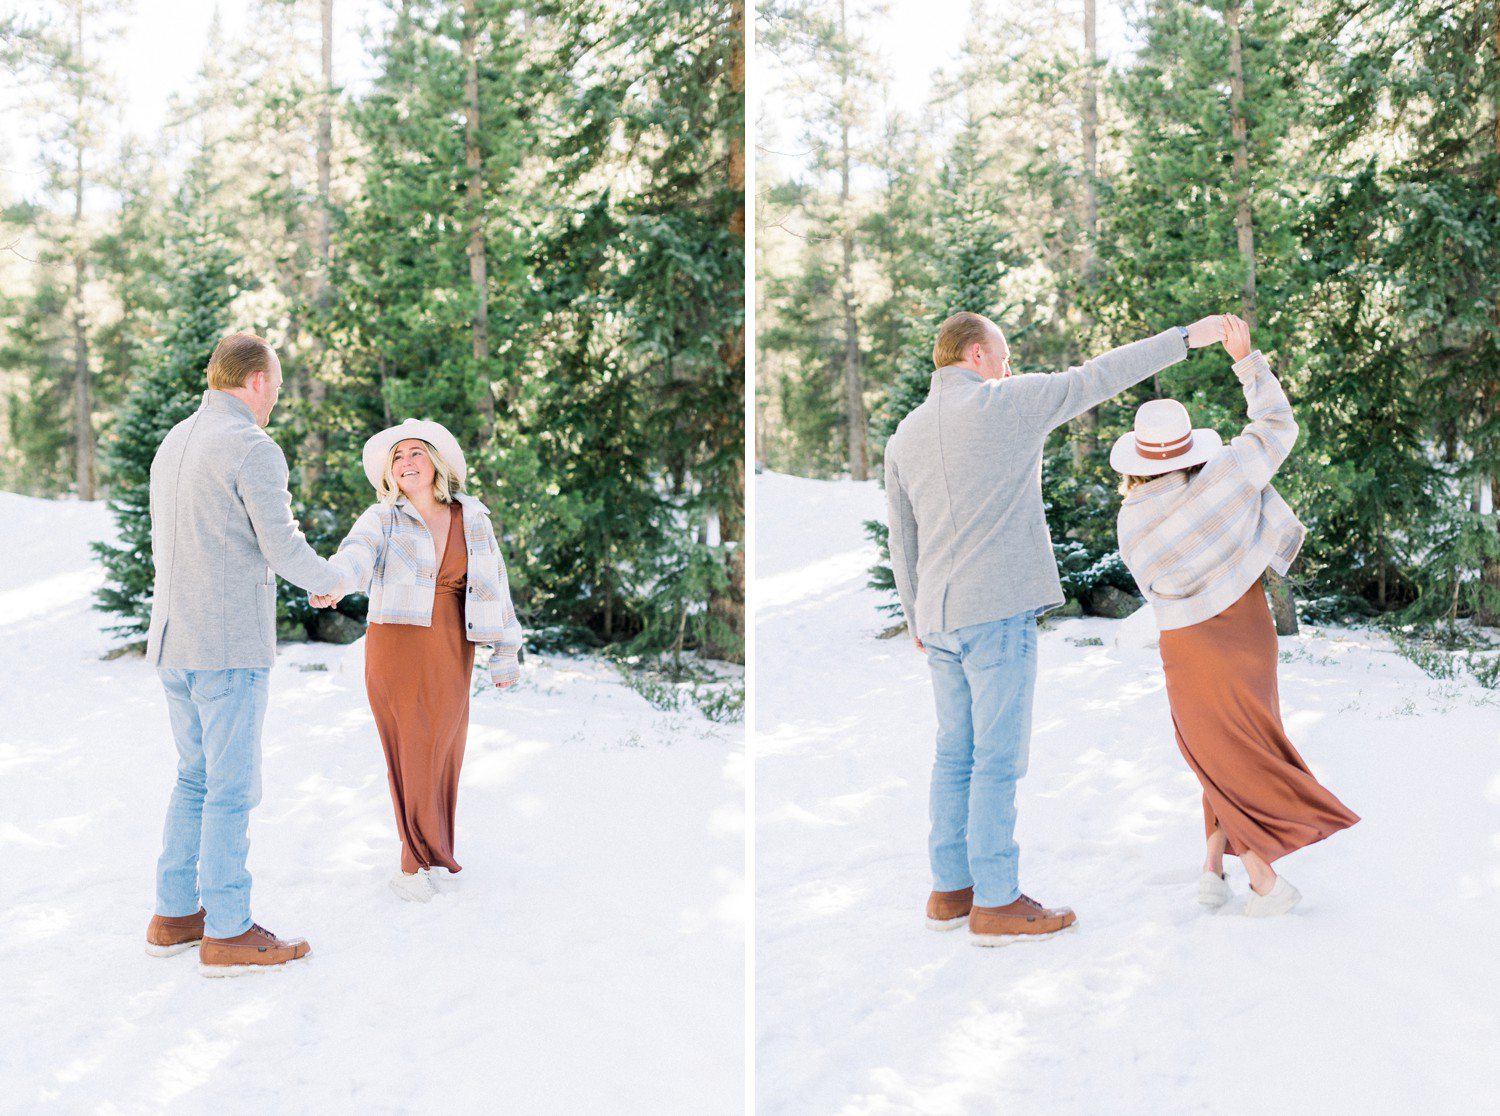 Engagement session at Officer's Gulch near Vail with snow.